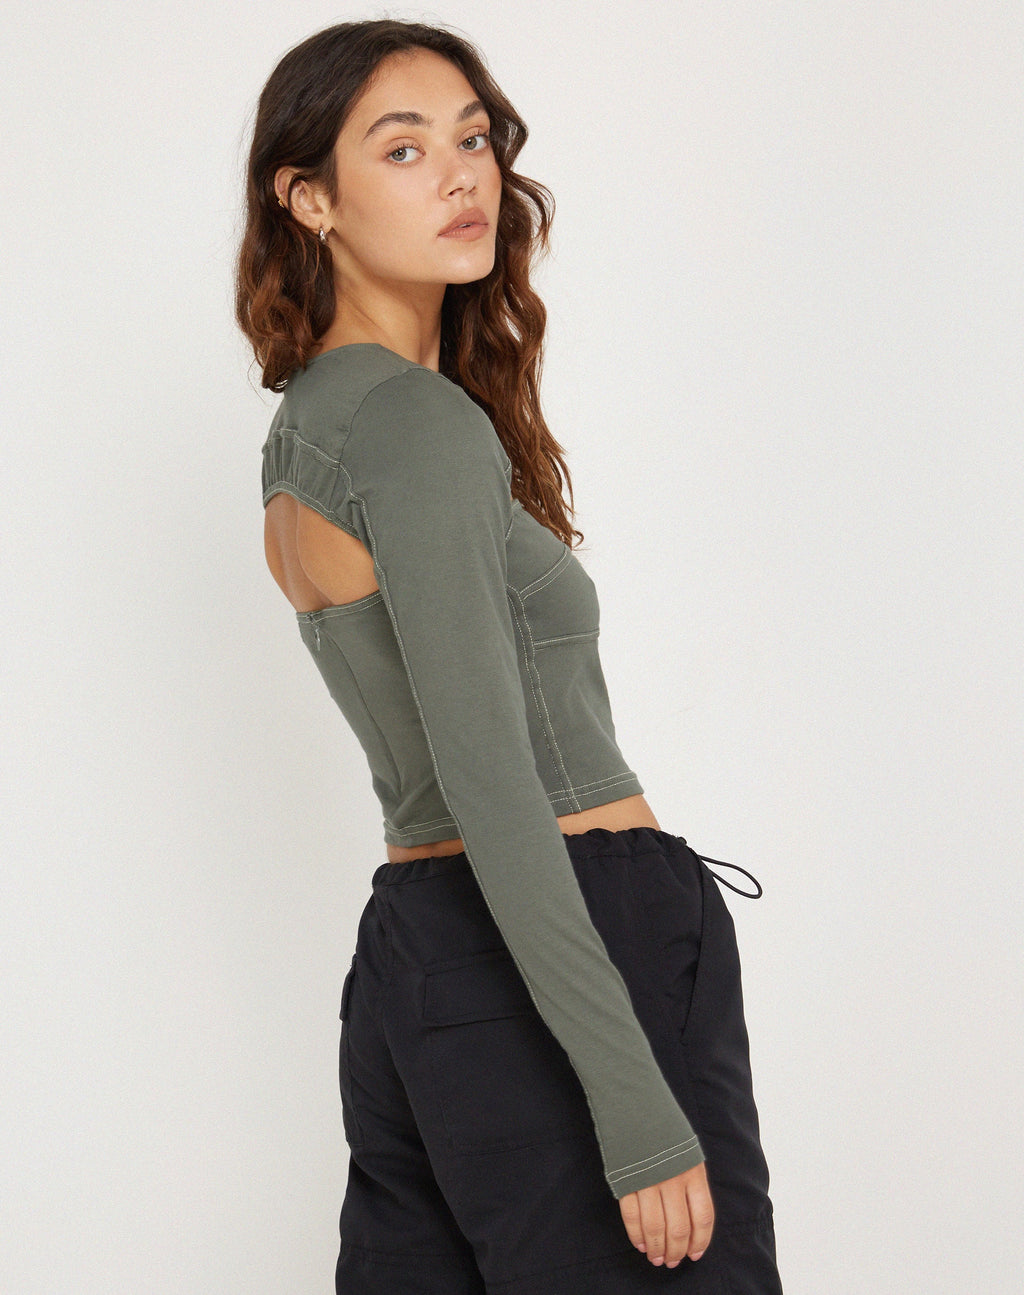 Matea Long Sleeve Top in Duck Green with Yellow Top Stitch